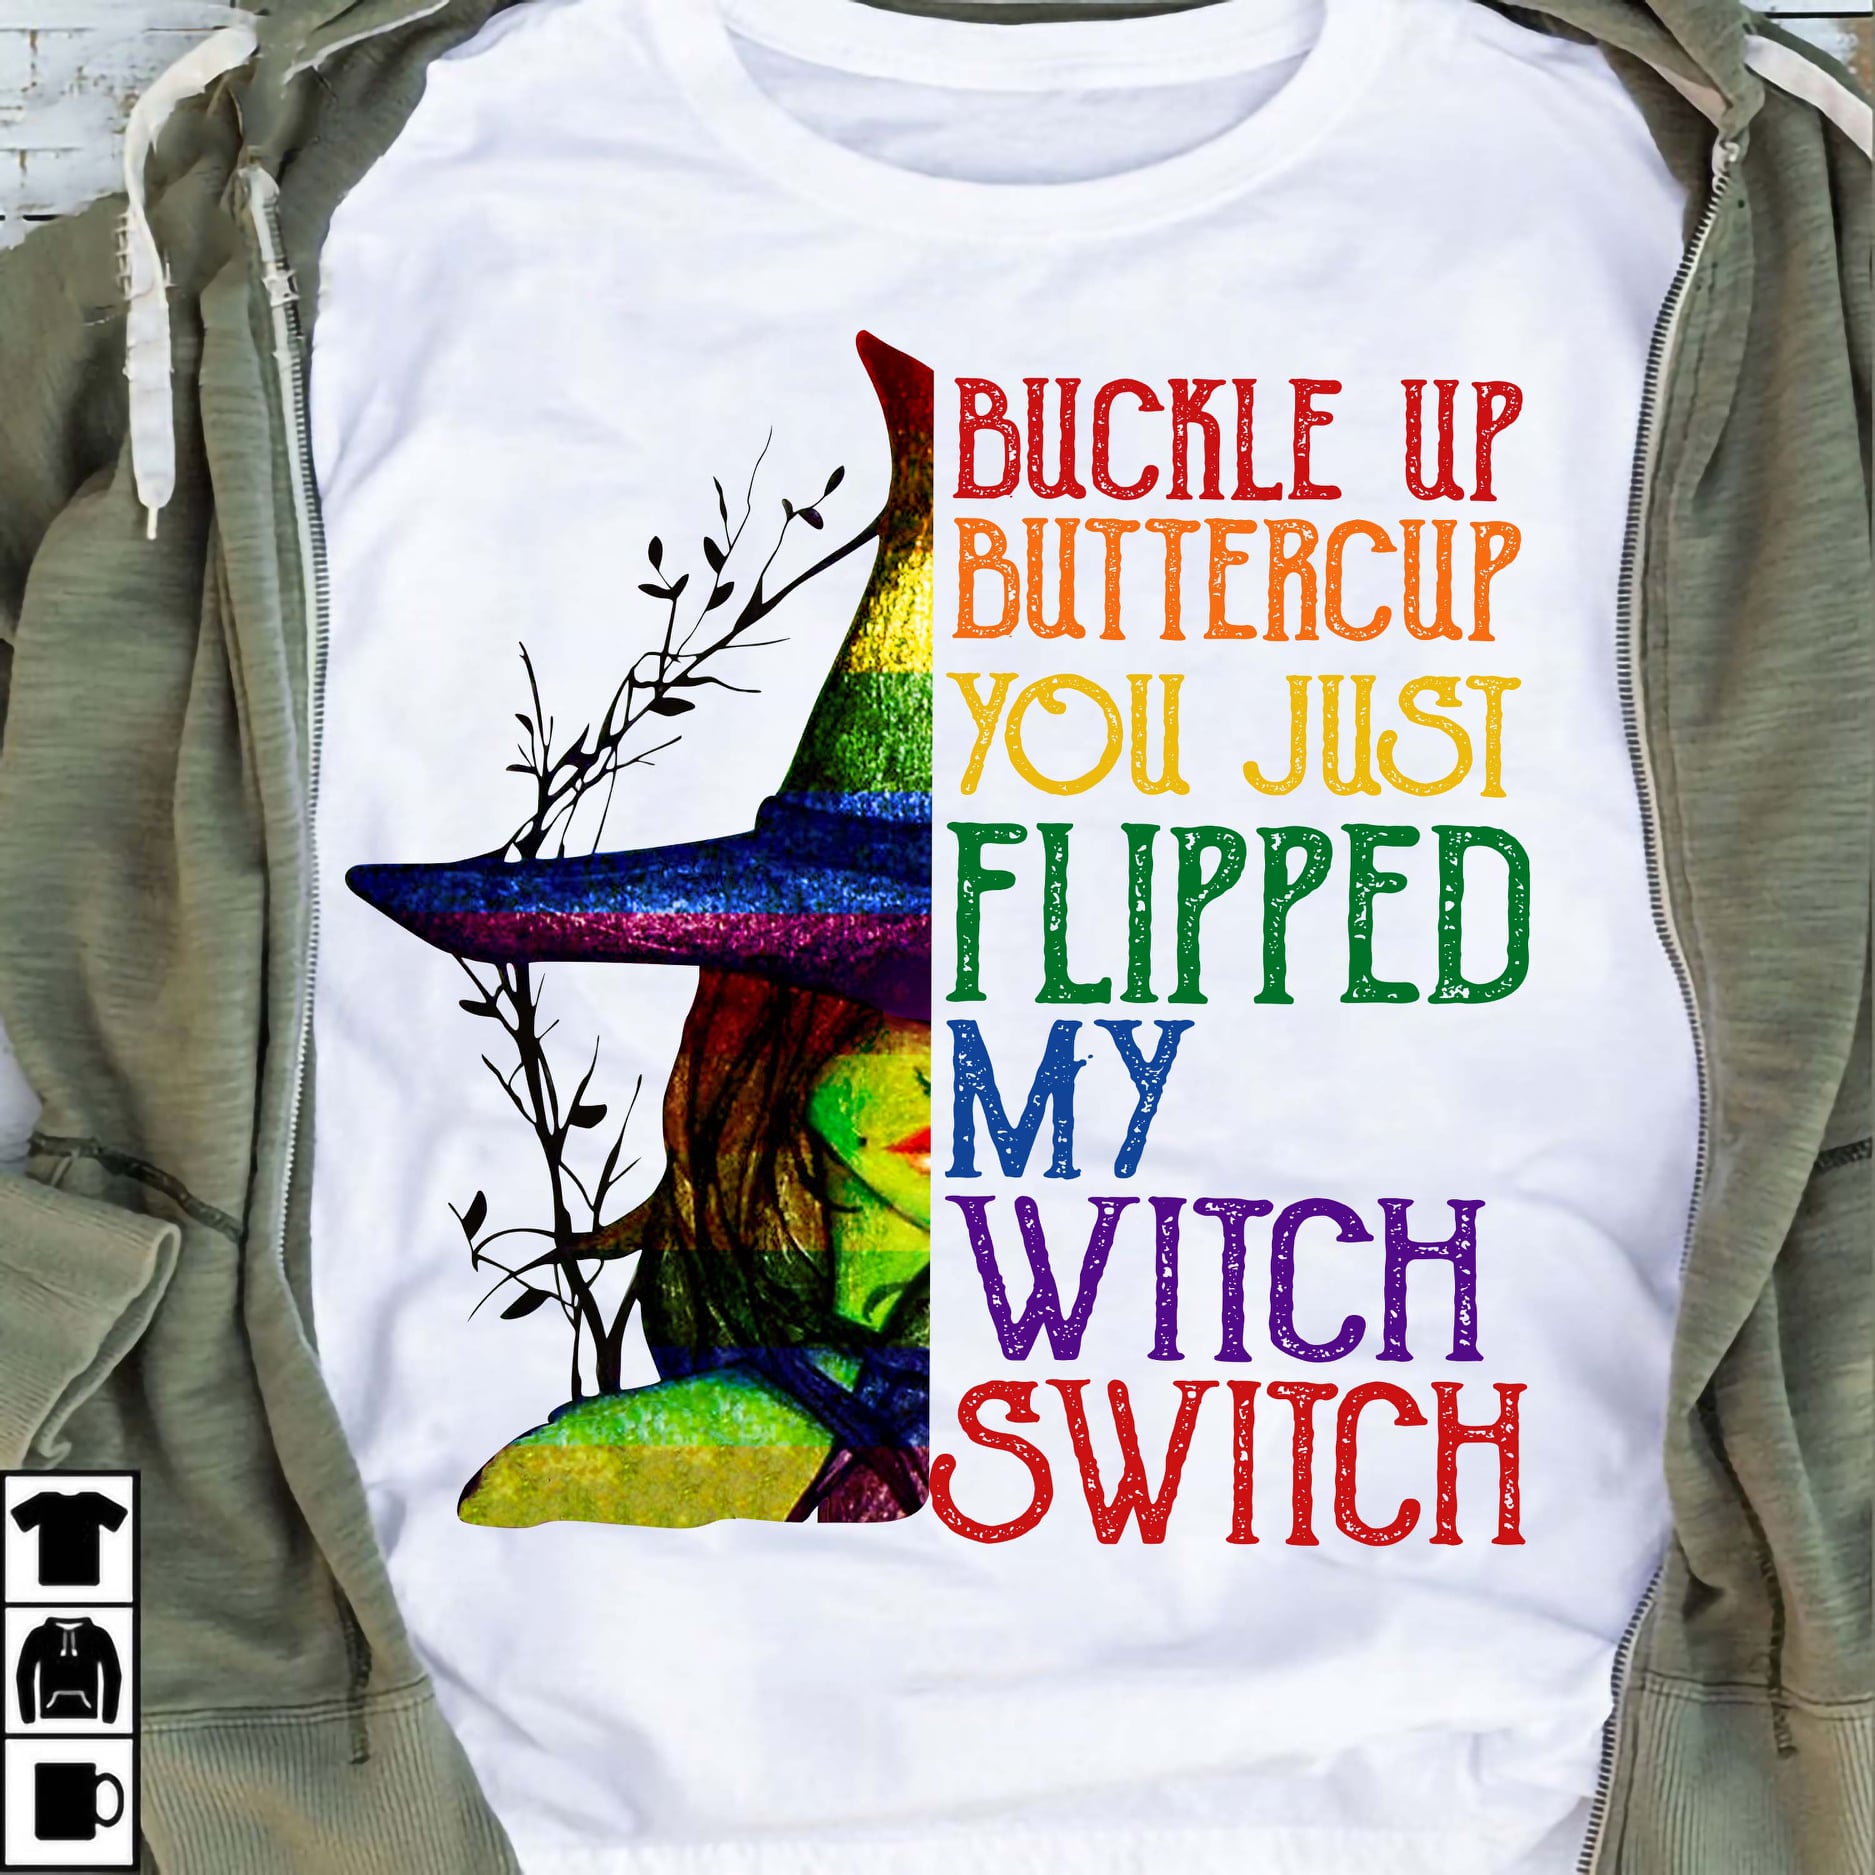 Buckle up buttercup you just flipped my witch switch - Lgbt community, lgbt witch